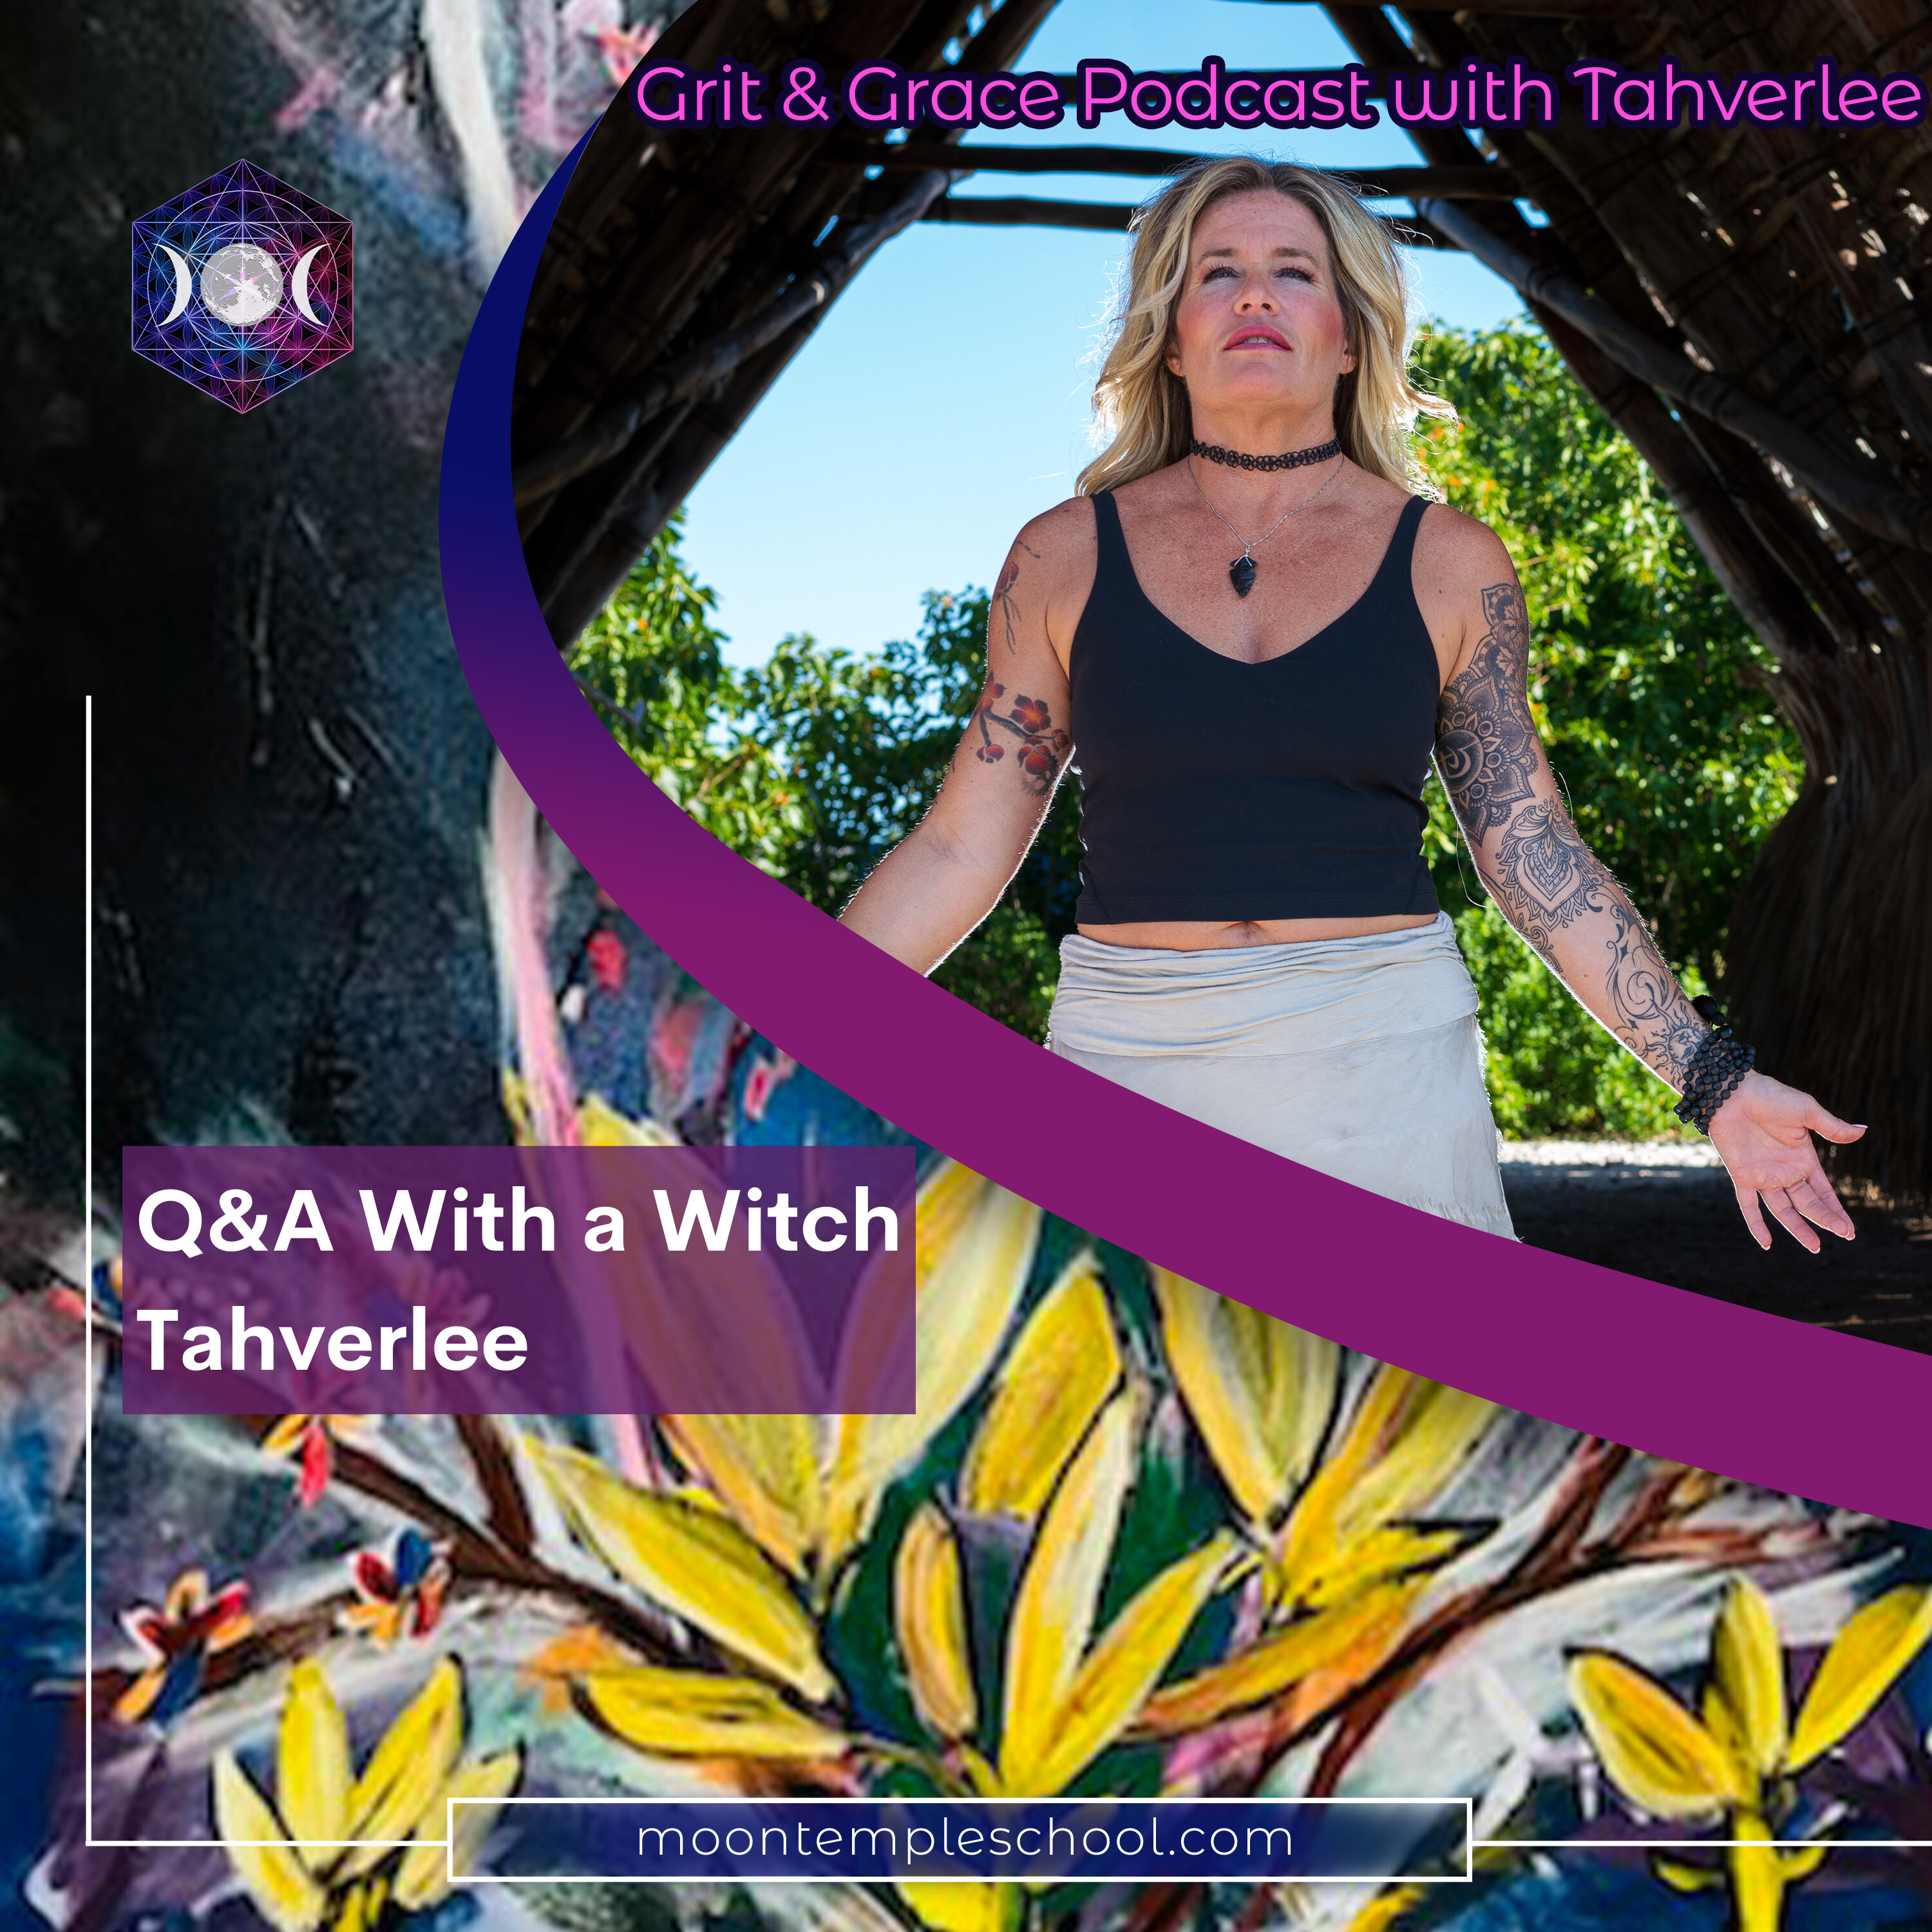 Q&A With a Witch